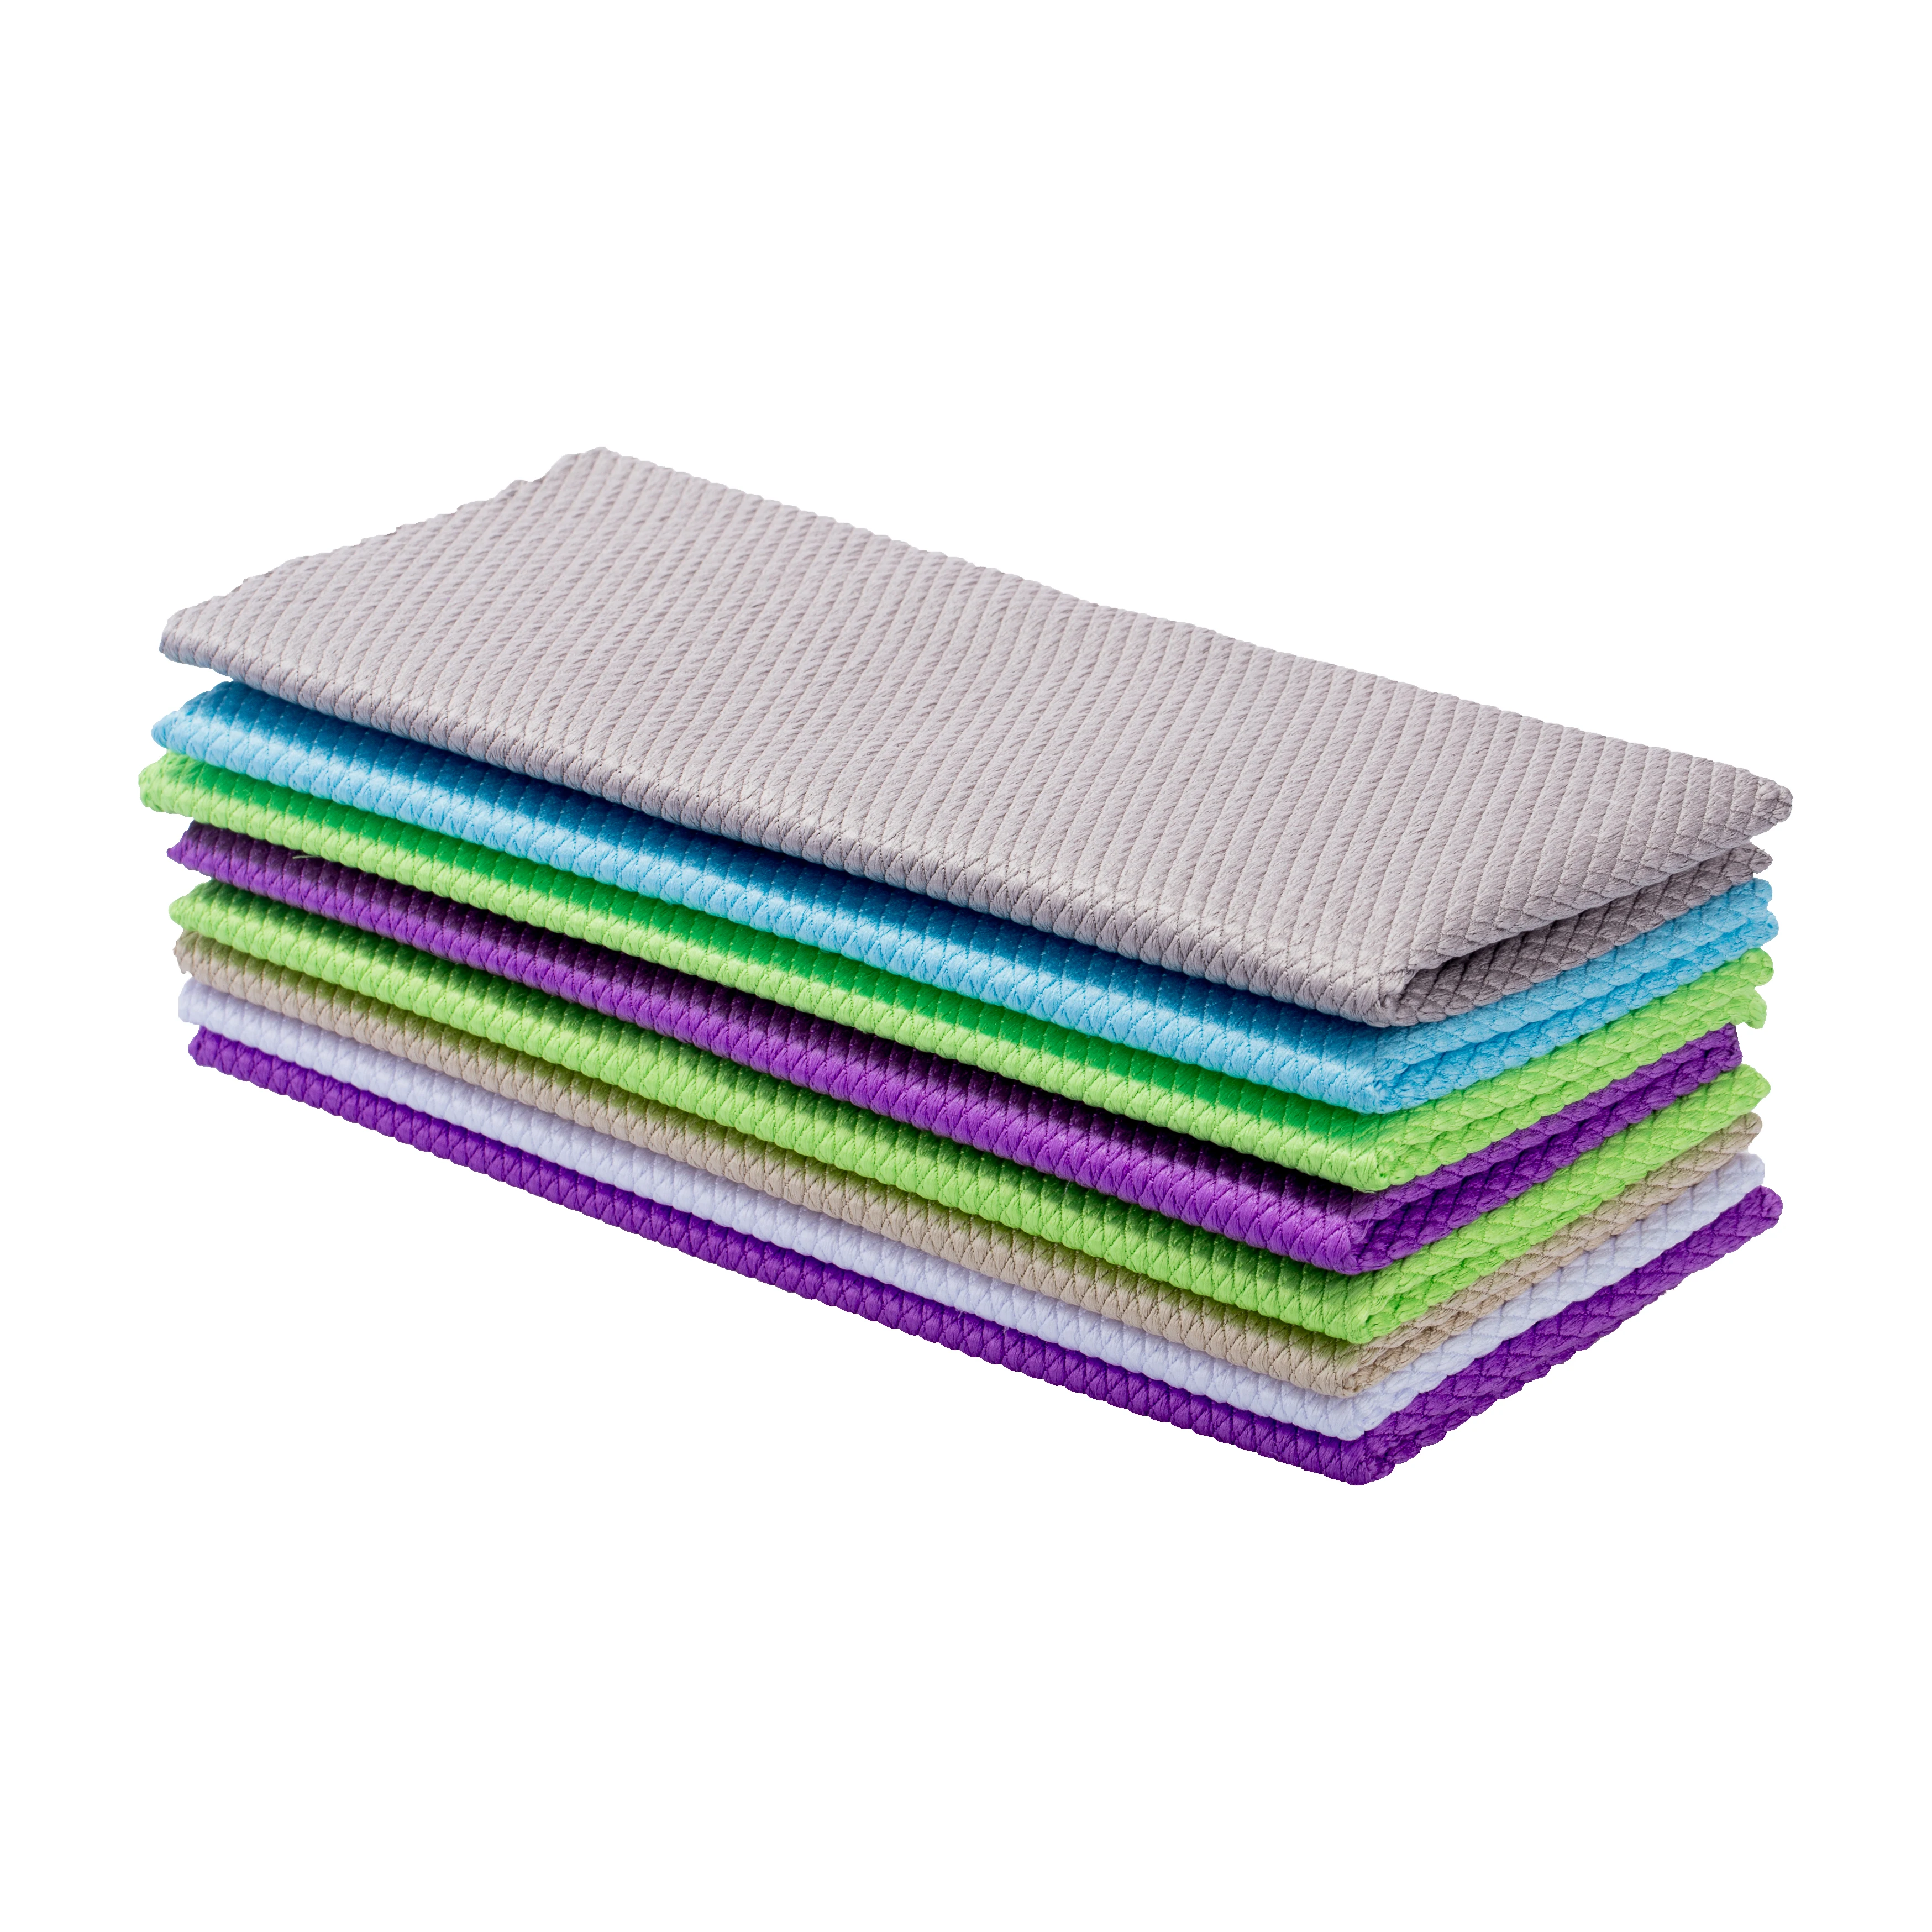 

Kitchen Anti-Grease Wiping Rags Efficient Fish Scale Cloth Cleaning Cloth Home Glass Washing Dish Cleaning Towel, Grey,blue,green,khaki,purple